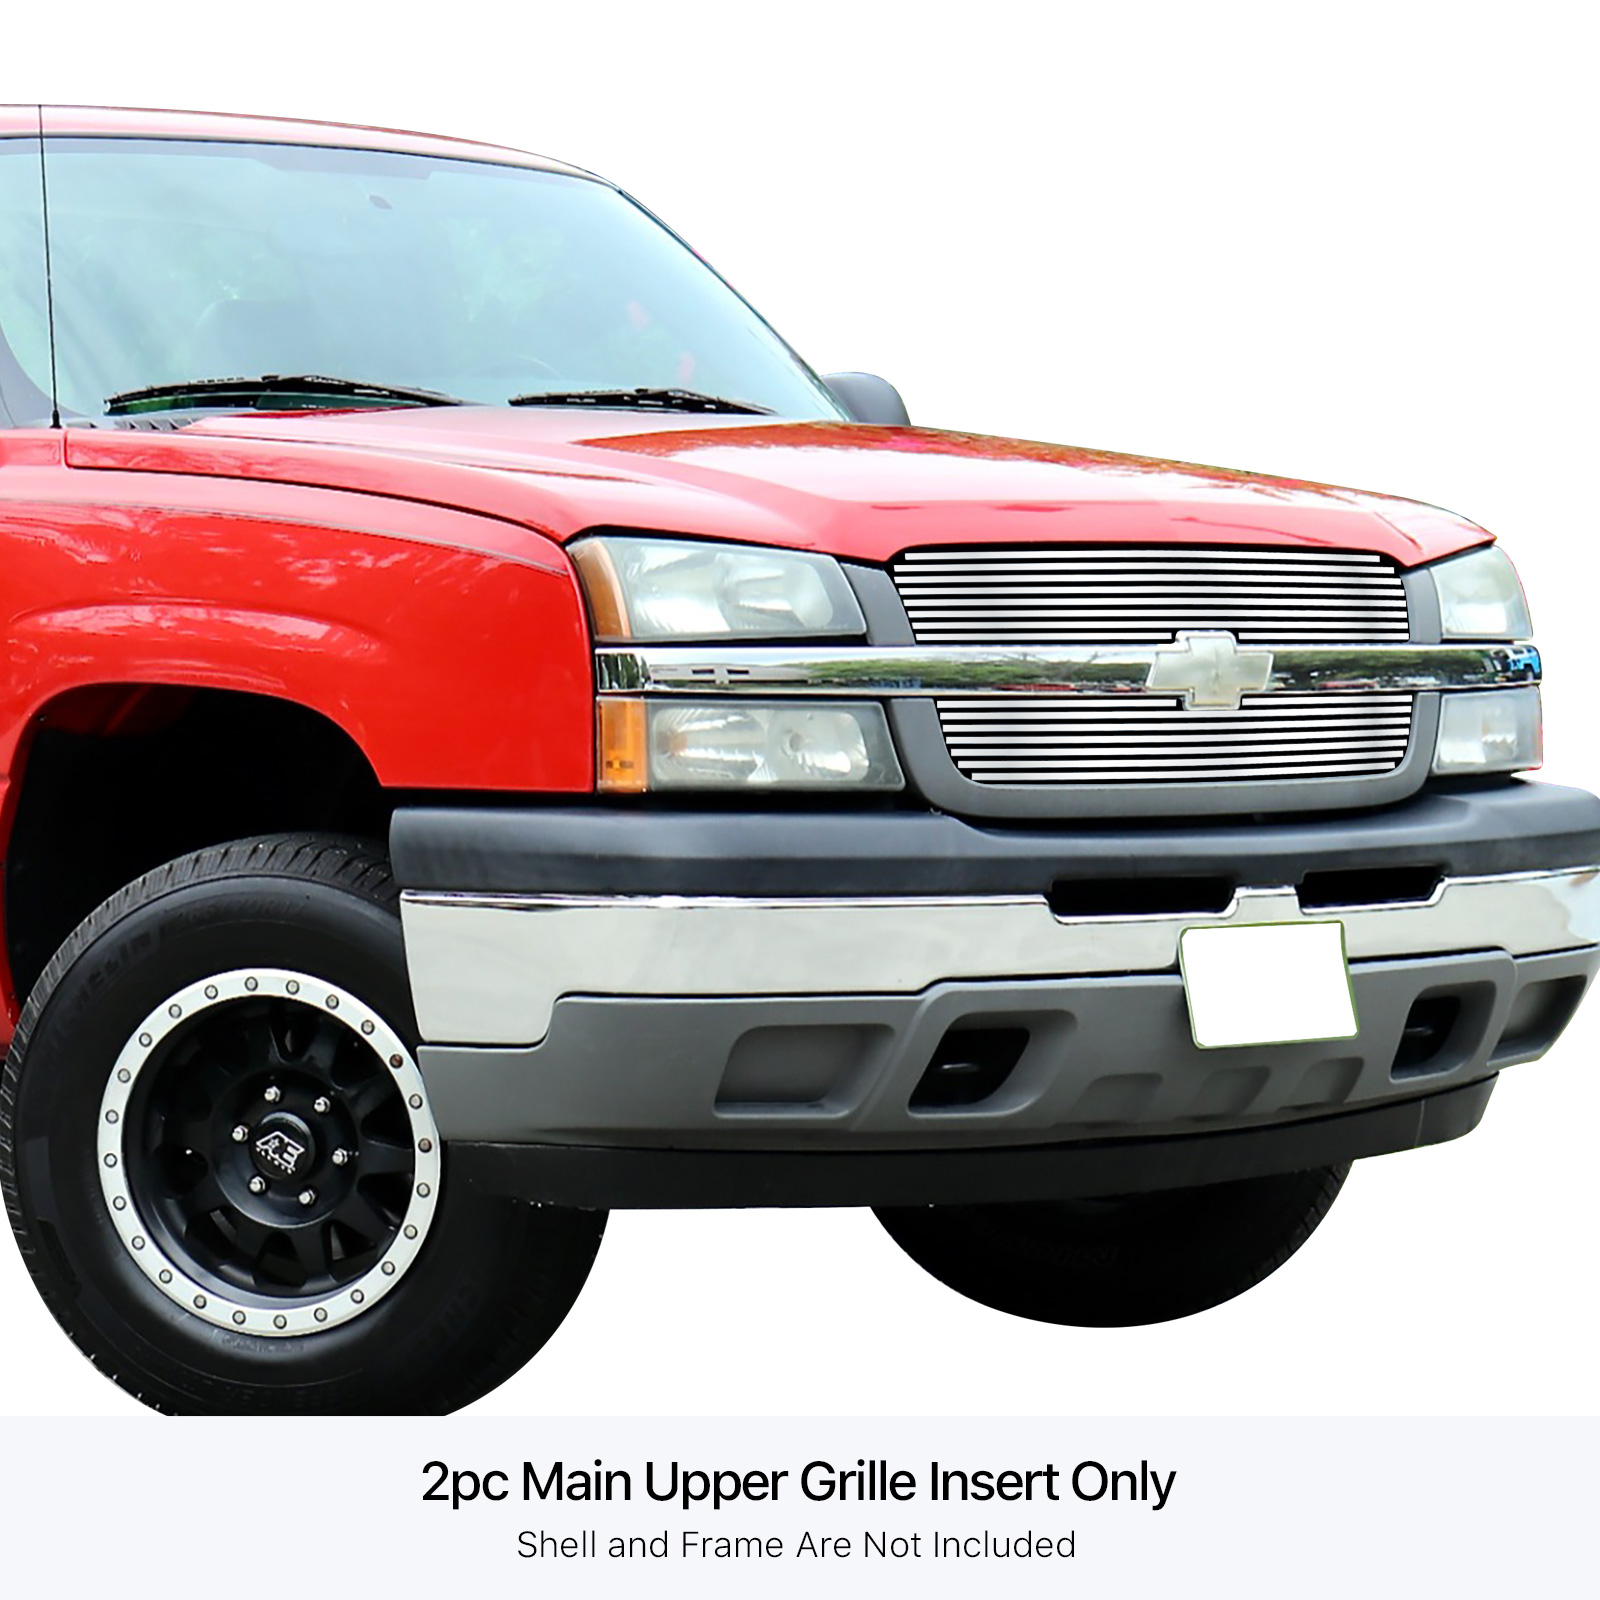 2002-2006 Chevy Avalanche Without Body Cladding/2003-2005 Chevy Silverado 1500 /2003-2005 Chevy Silverado 1500 SS /2003-2004 Chevy Silverado 2500 /2003-2004 Chevy Silverado 3500 /2003-2005 Chevy Silverado 1500 HD /2003-2004 Chevy Silverado 2500 HD /2002-2